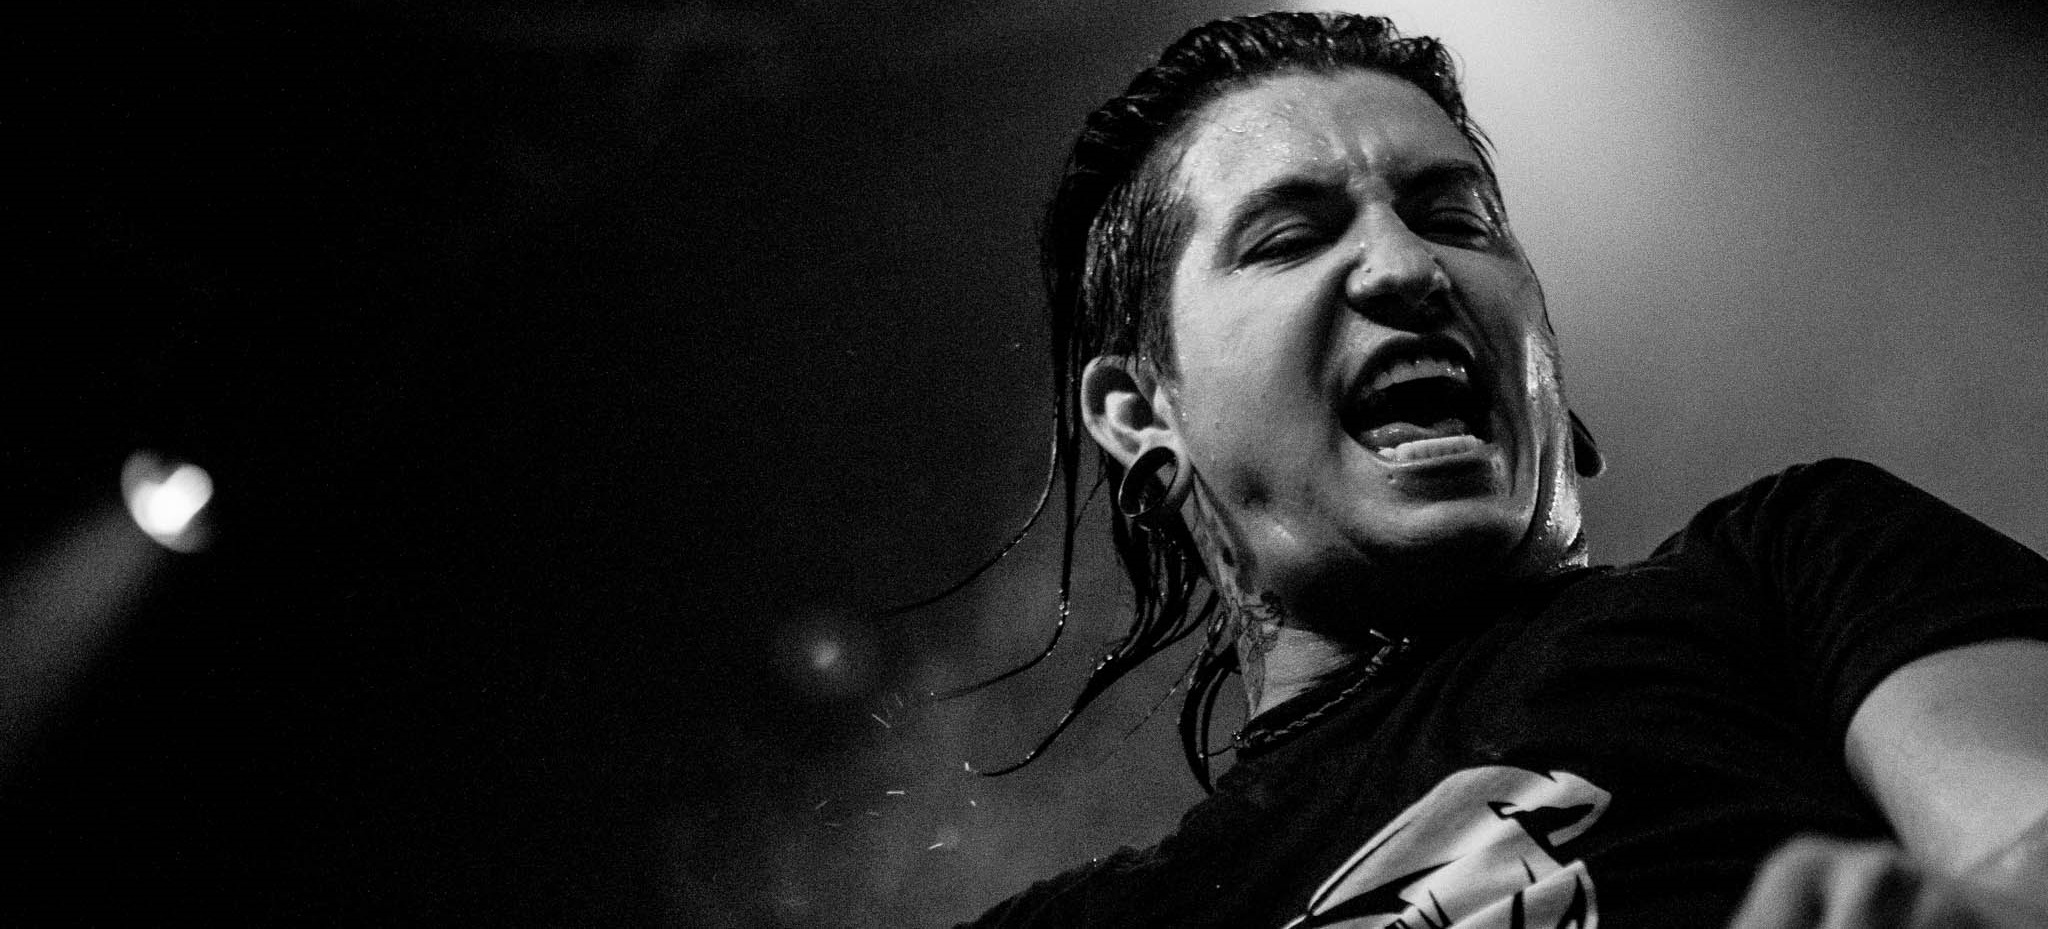 ONE FOR THE MONEY – A CONVERSATION WITH CRAIG MABBITT OF ESCAPE THE FATE